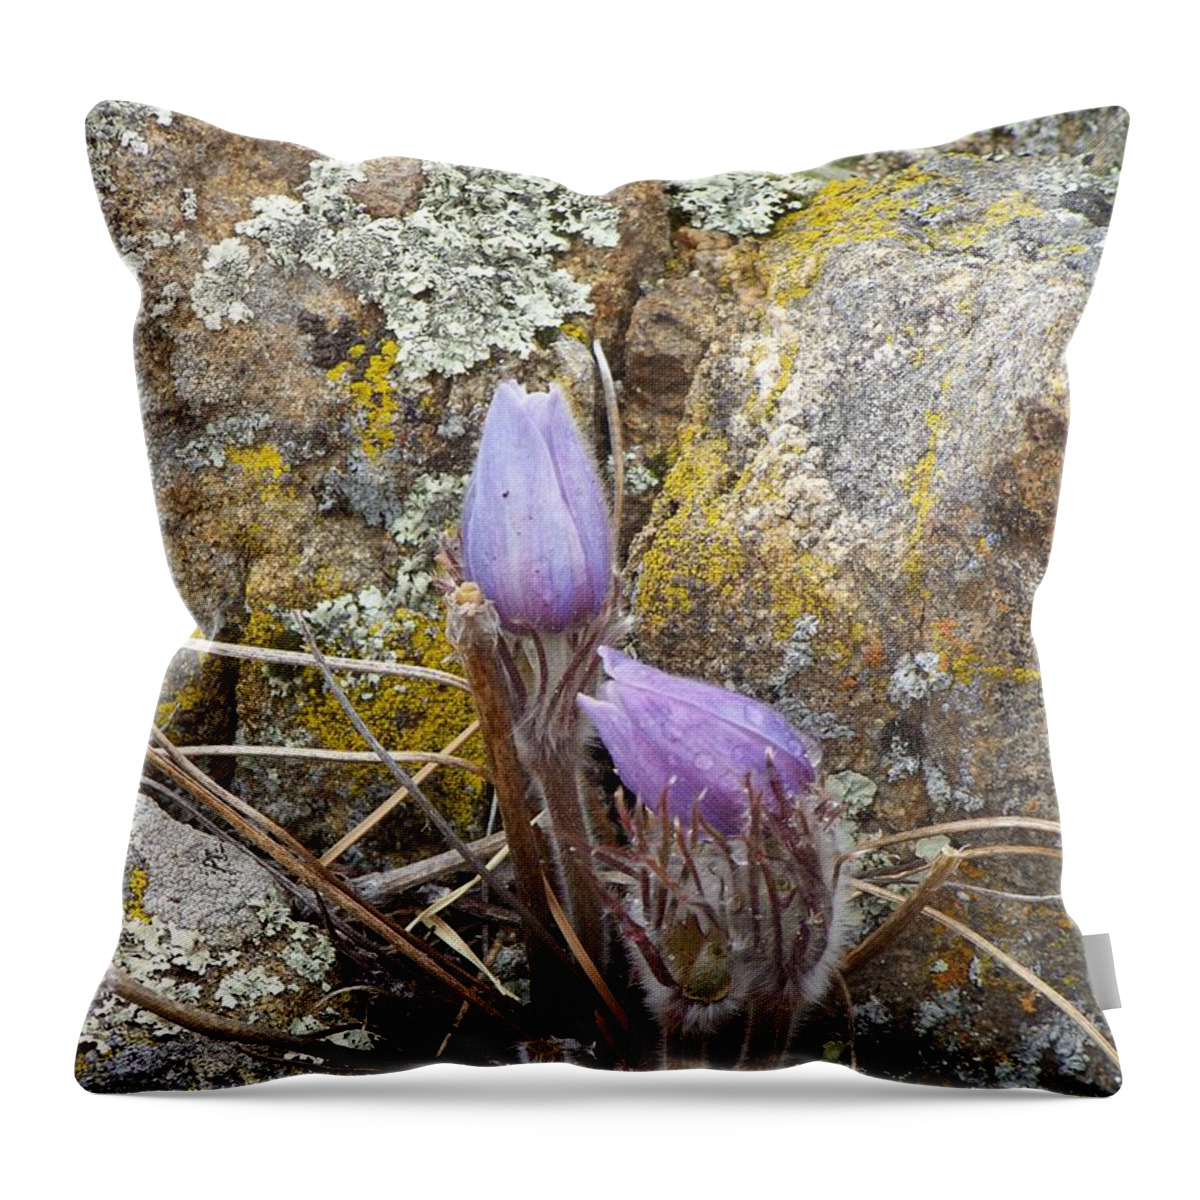 Pasque Flowers Throw Pillow featuring the photograph Pasque Flowers by Dorrene BrownButterfield